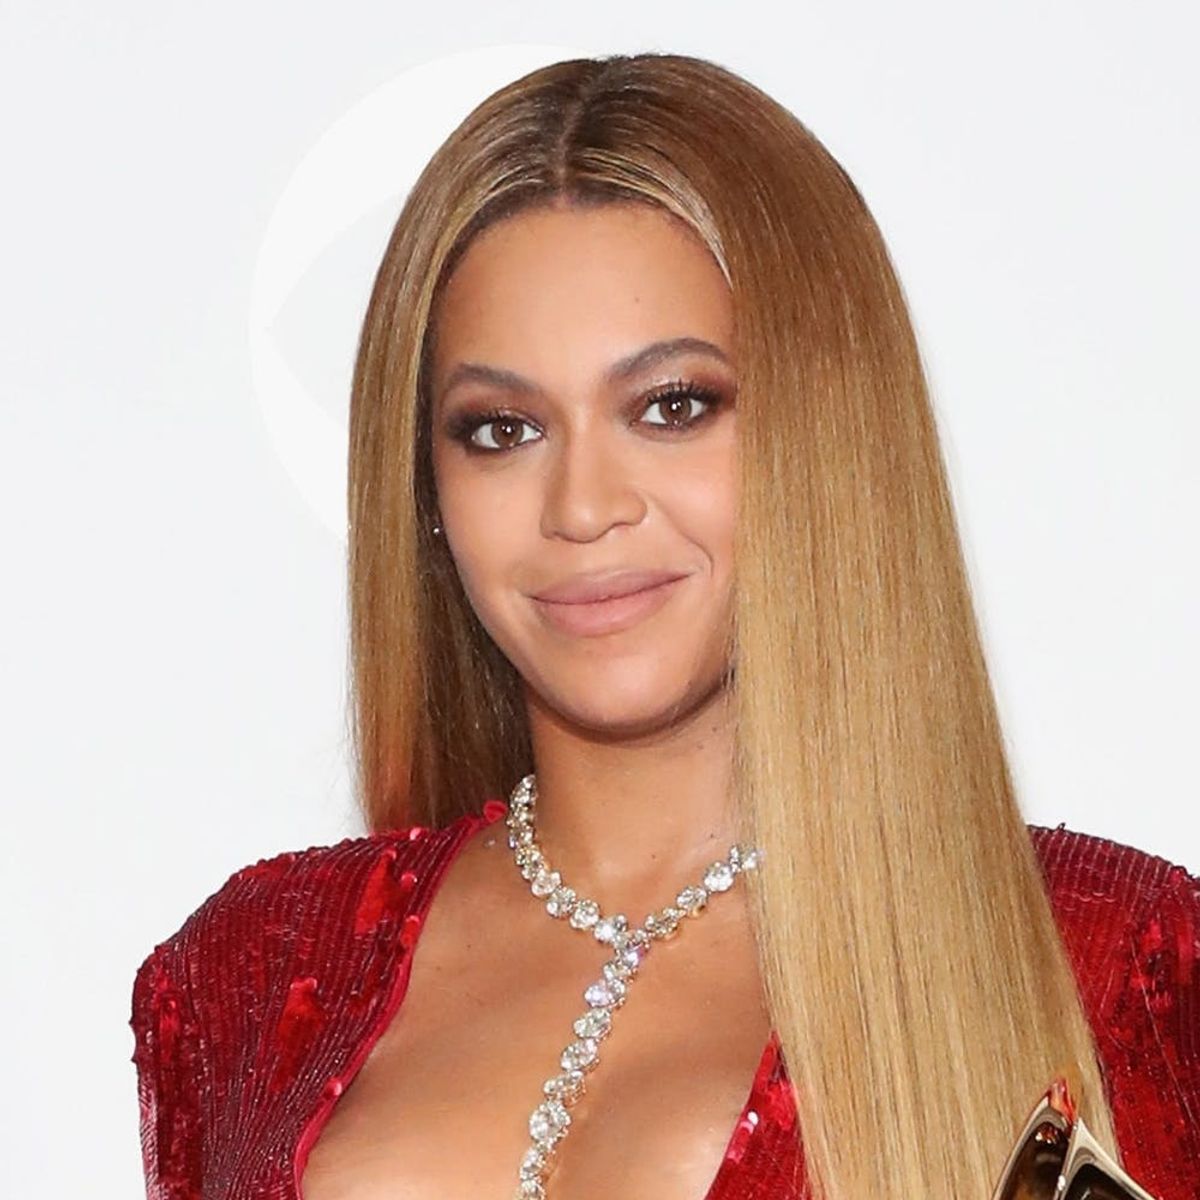 Beyoncé Just Paid Tribute to *This* Iconic Rapper With FIVE Epic Costumes